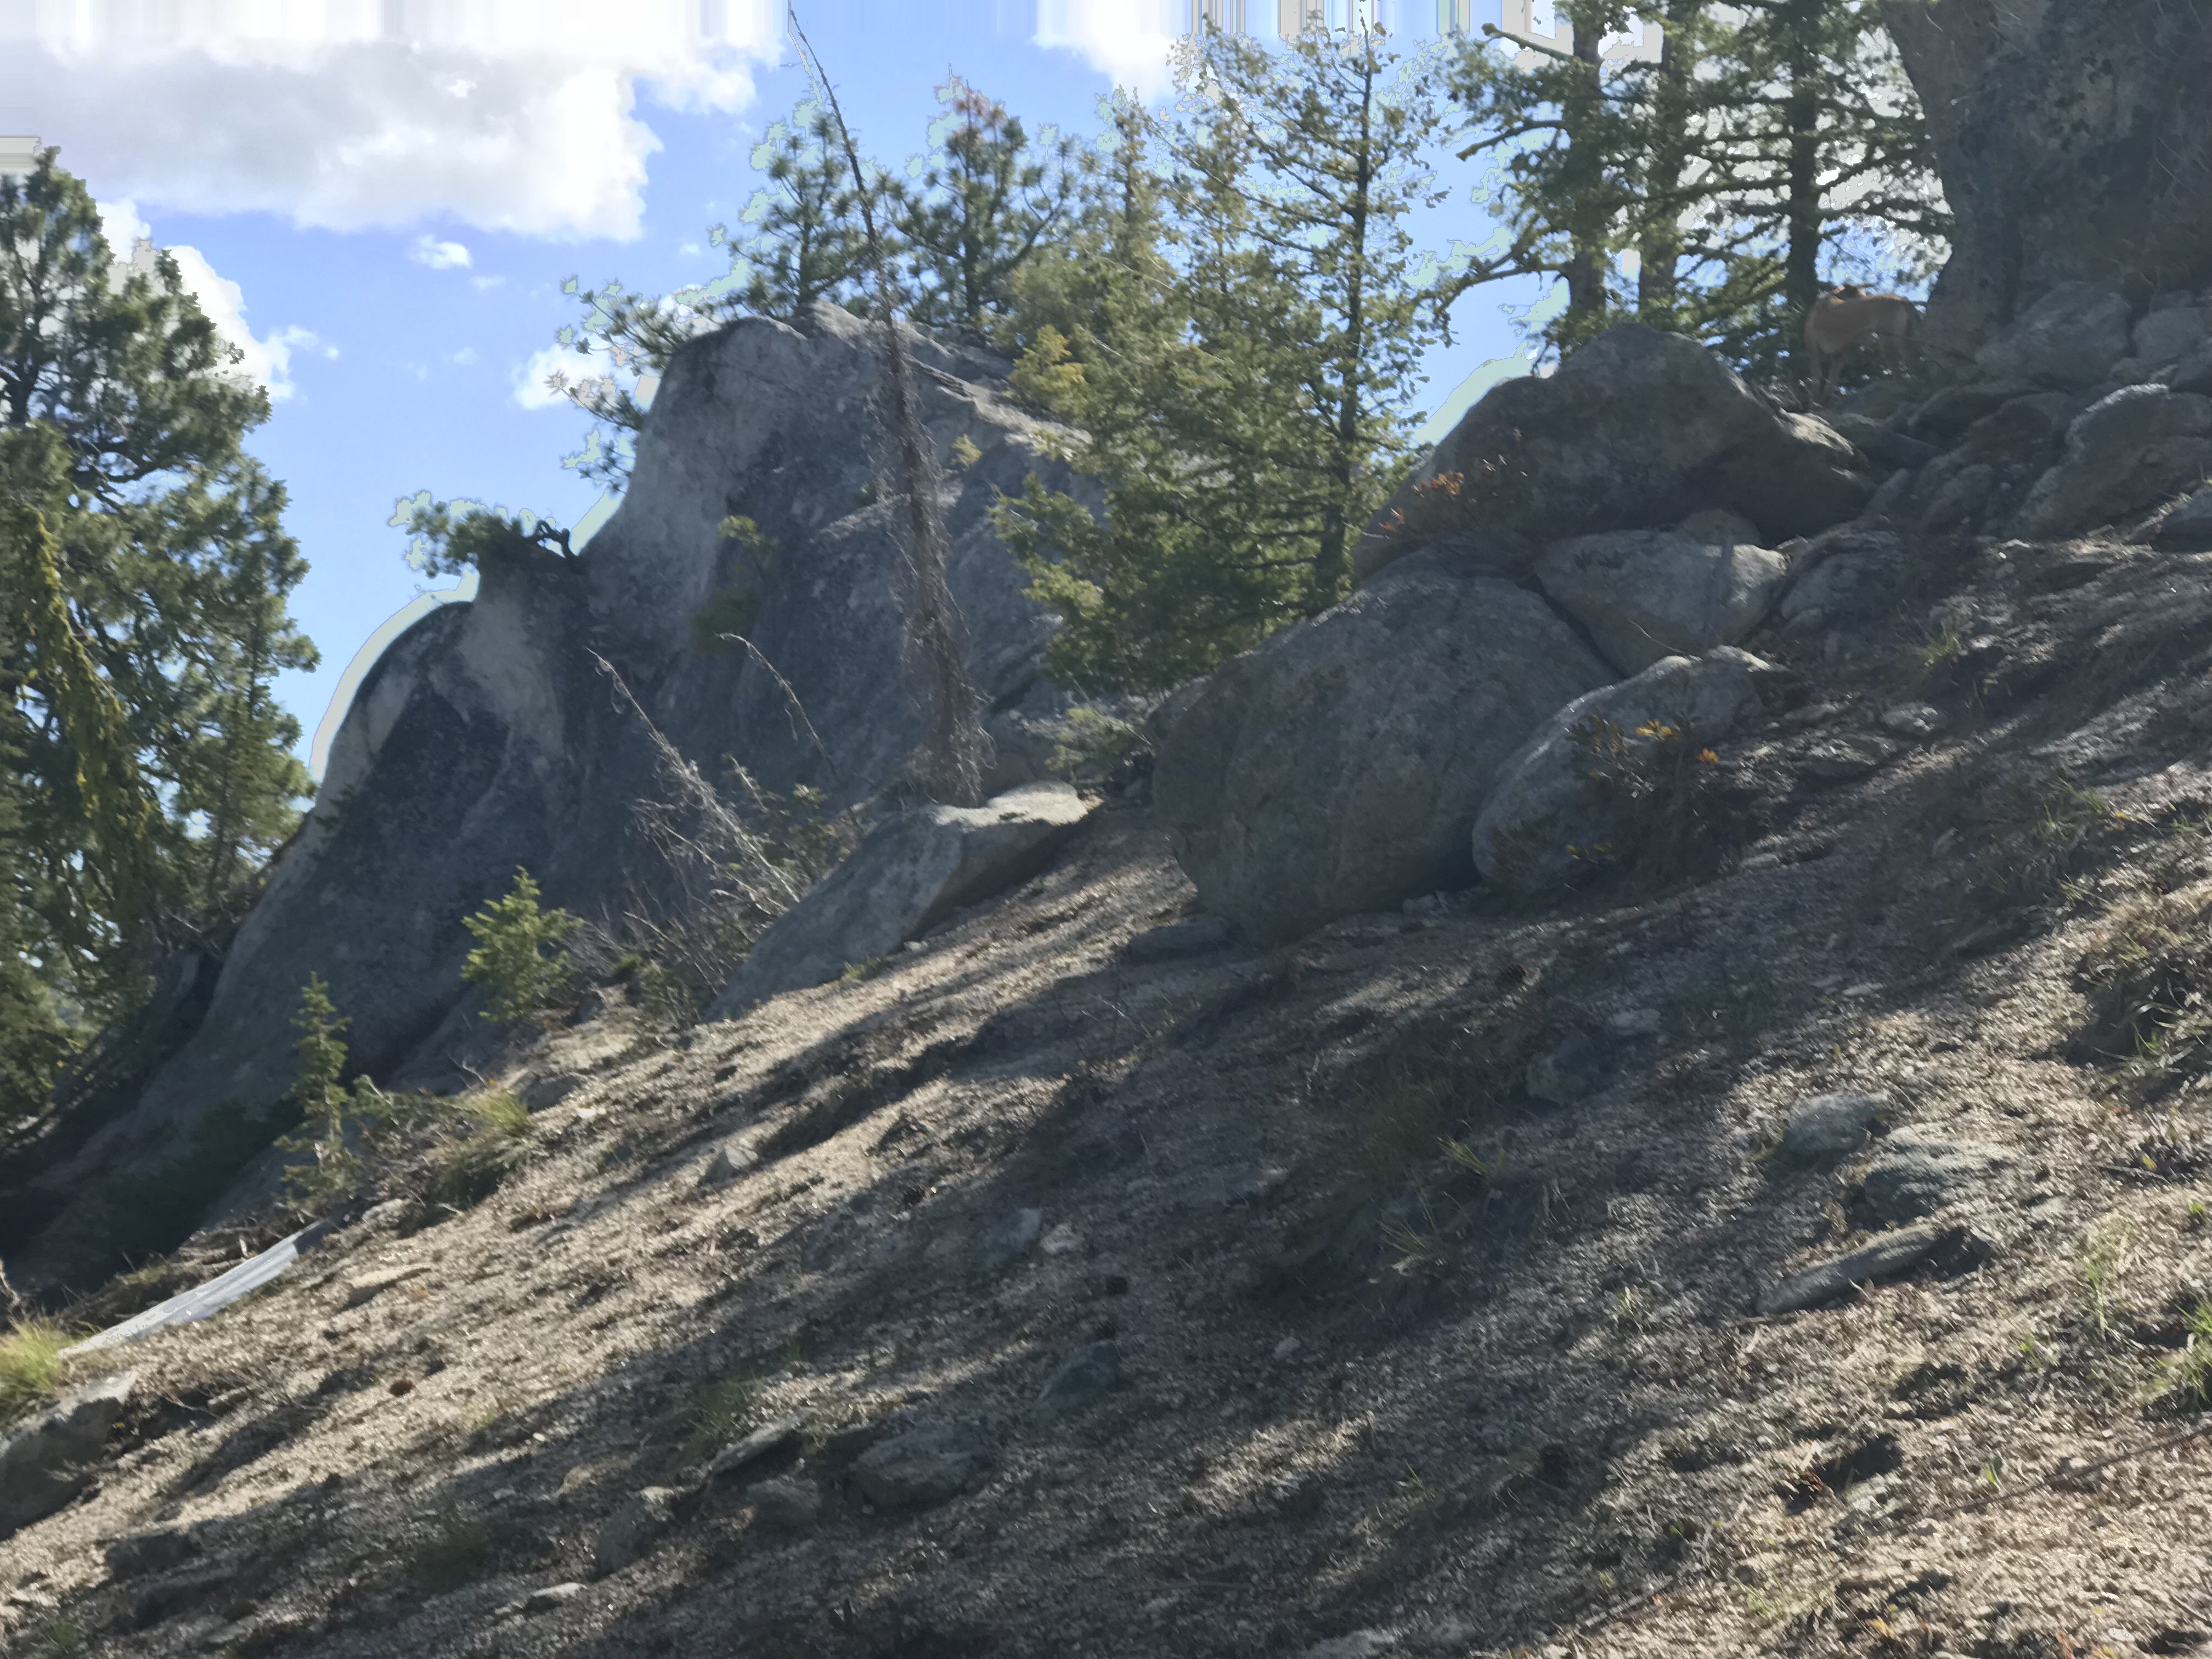 The summit is a granite outcrop surrounded by small trees.